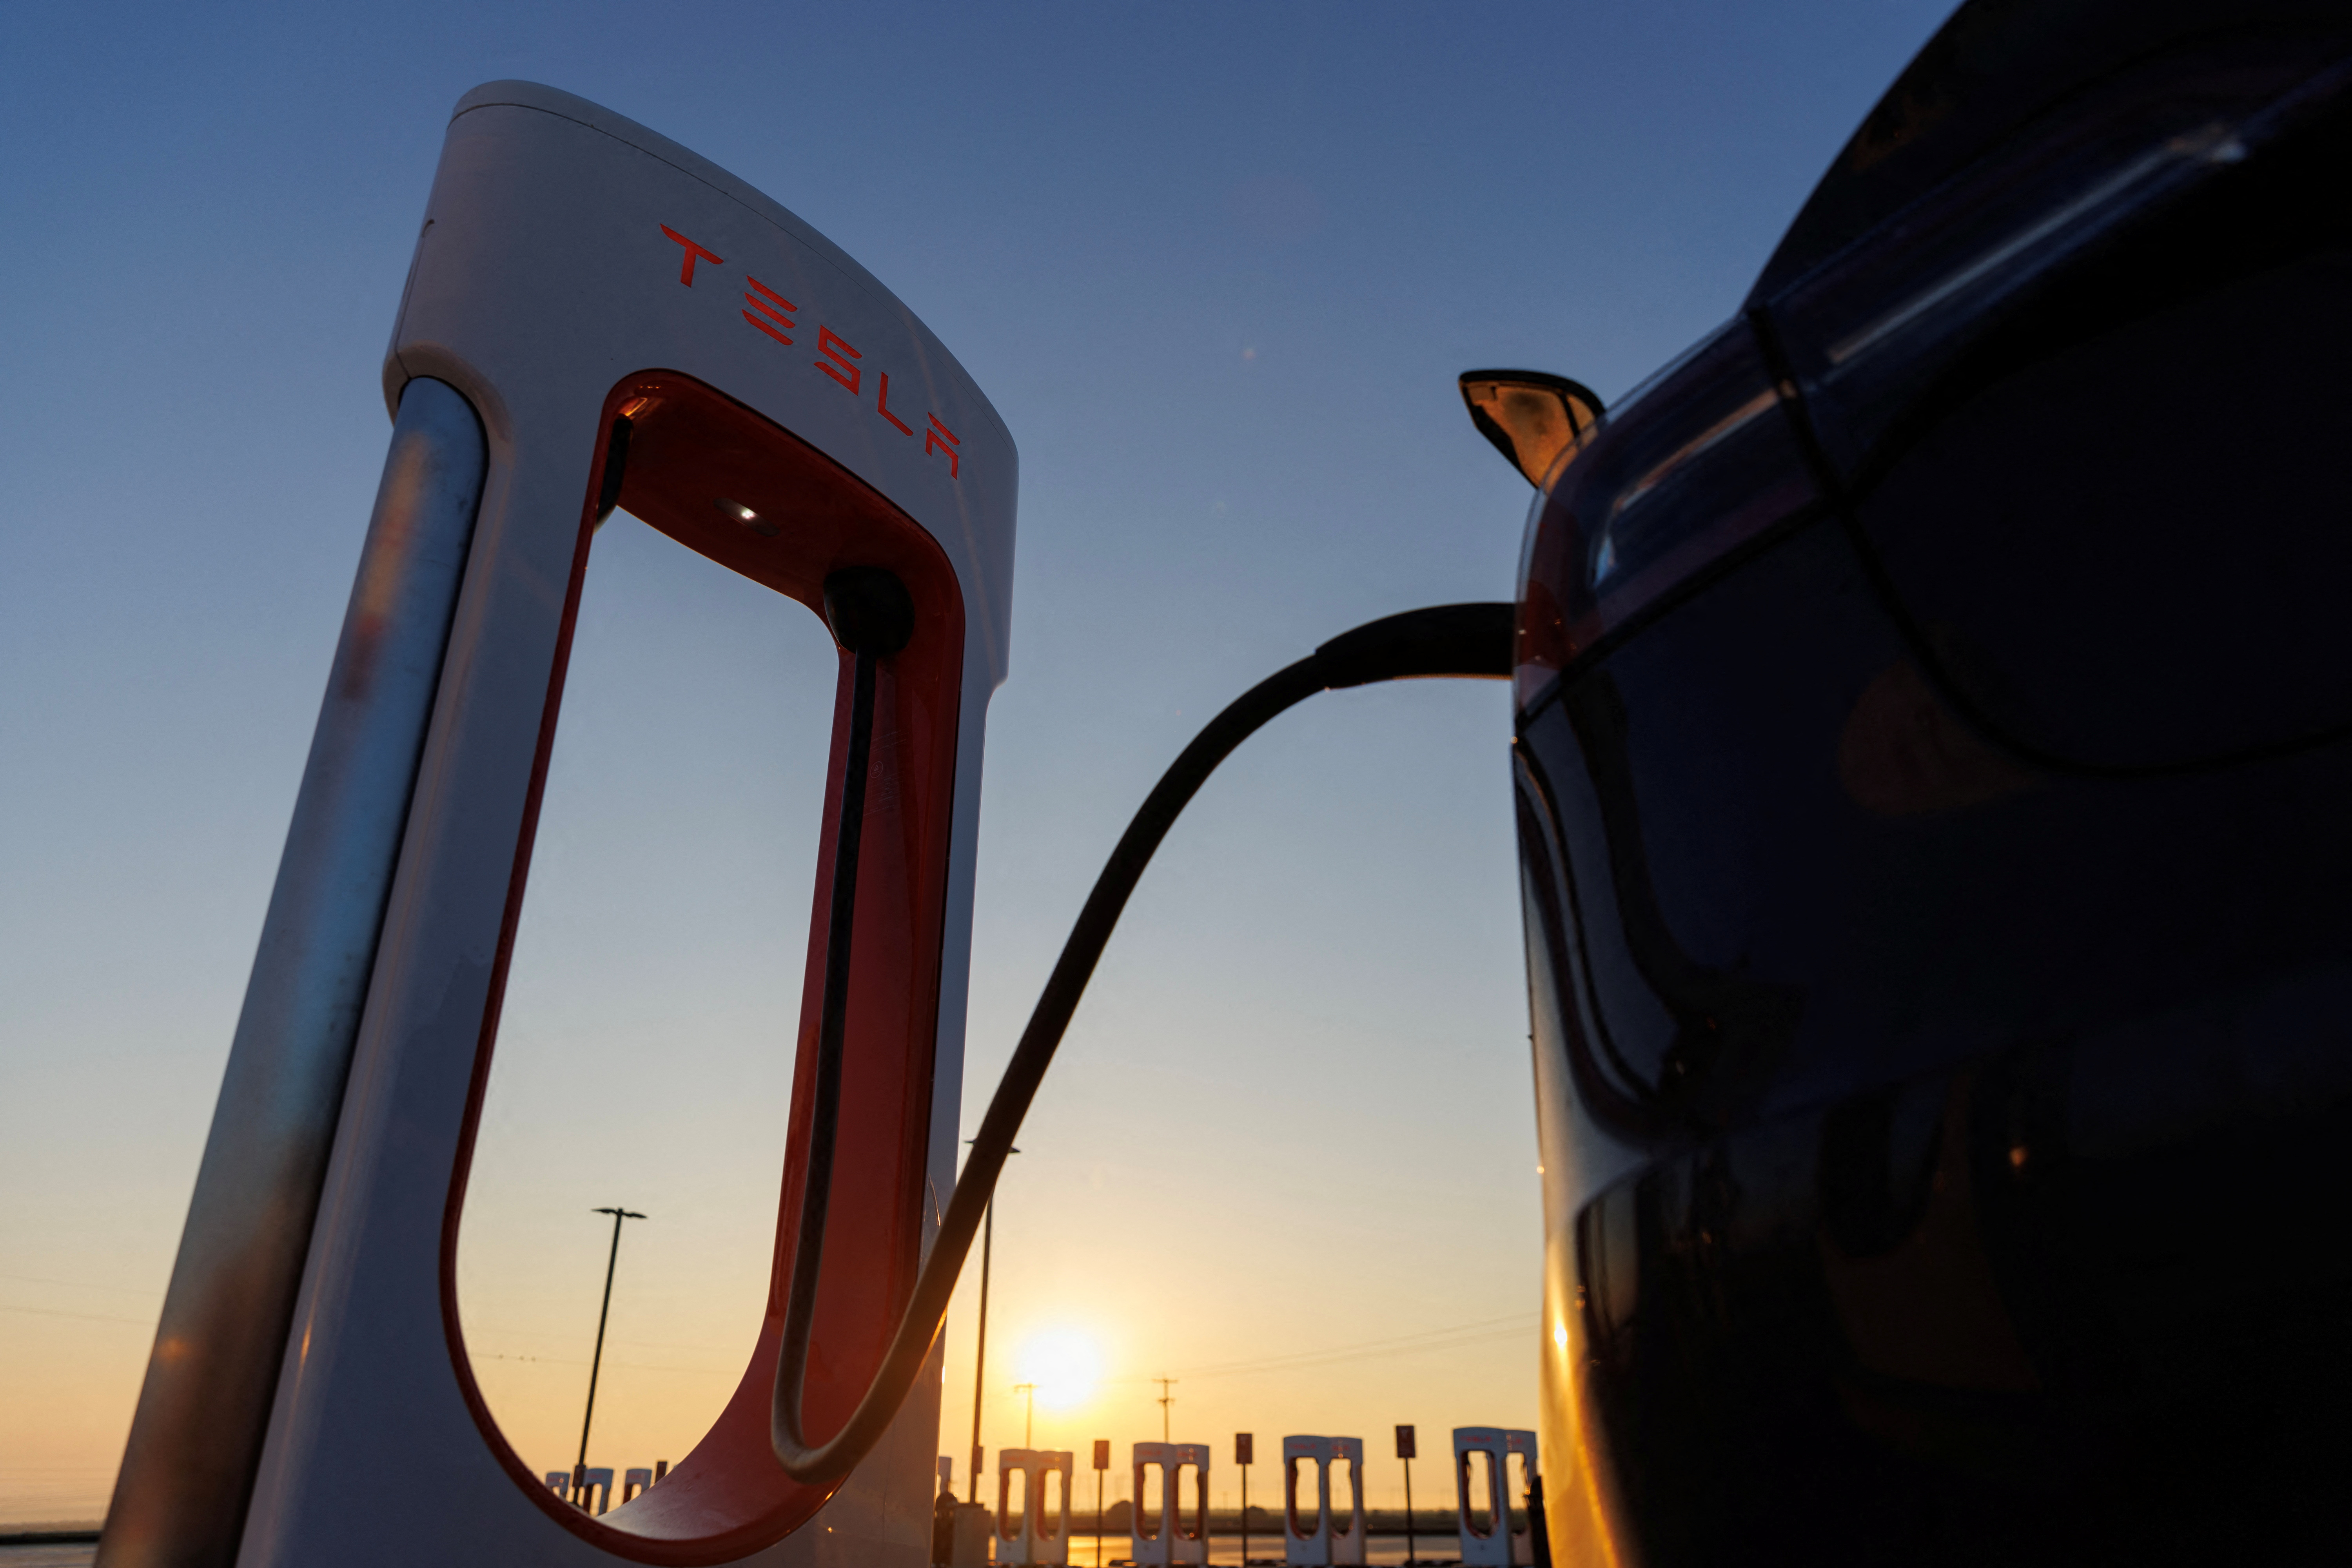 We Plugged a Ford, a Hyundai, and a VW into Tesla's Magic Dock  Superchargers. Only Two Vehicles Charged.